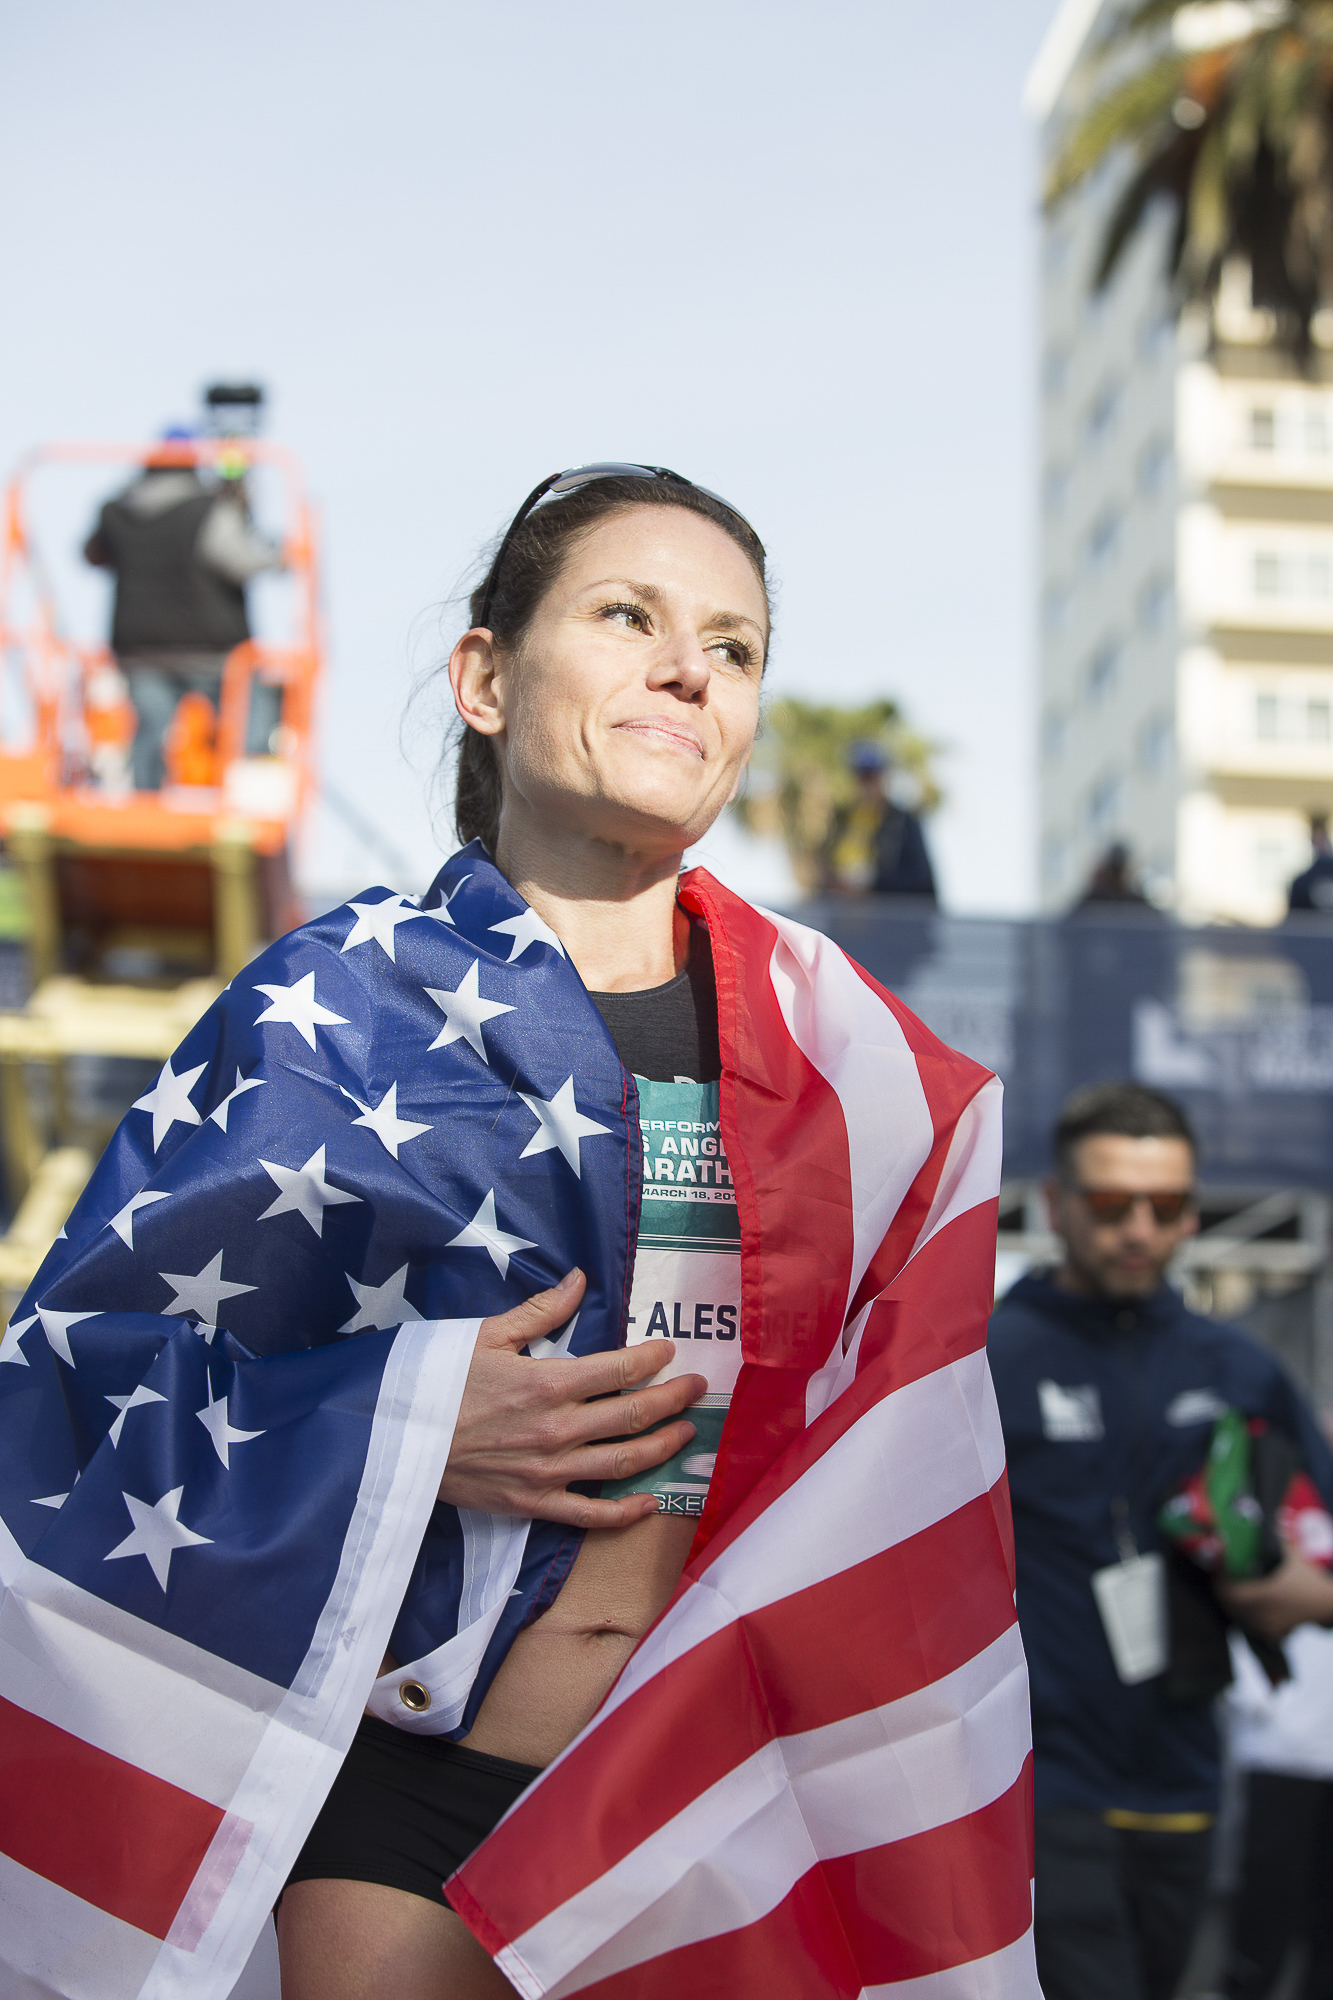  Los Angeles Marathon competitor Christina Vergara-Aleshire drapes her US flag around her after coming in fourth-place during the pro women’s LA marathon event  on March 18, 2018 in Santa Monica, California. Aleshire received the best finish by an Am